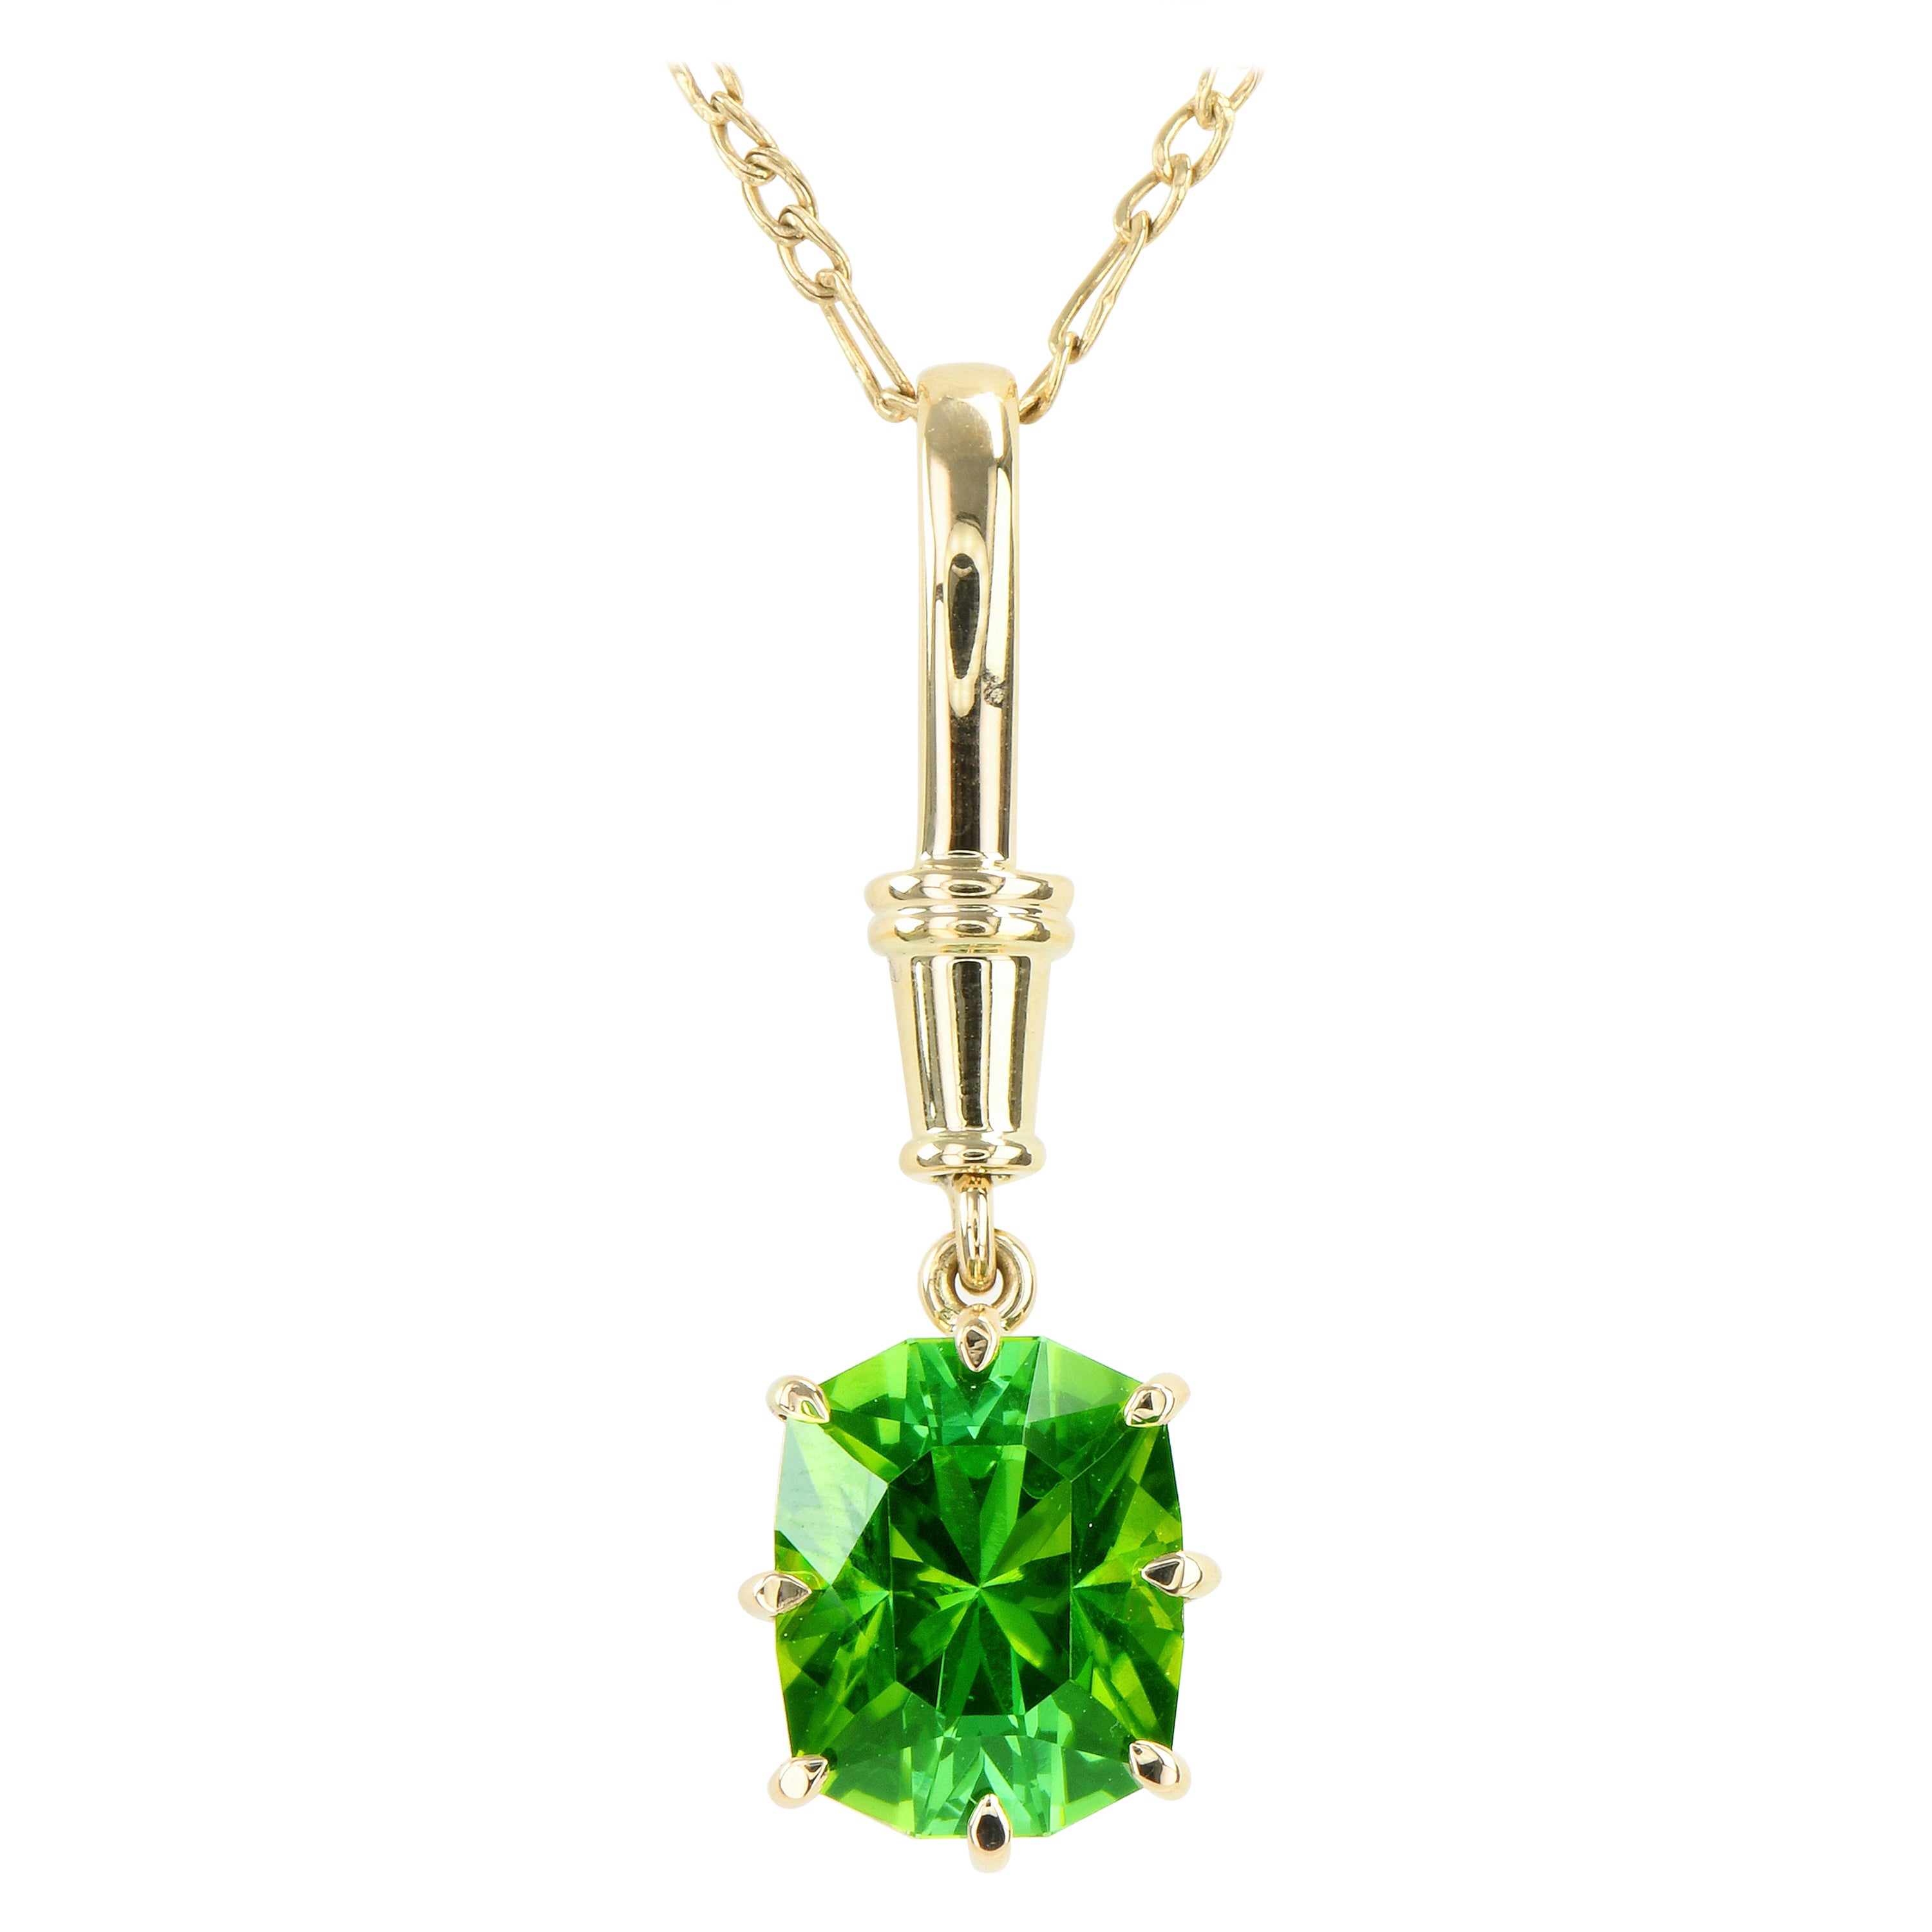 6.64ct Green Tourmaline Pendant-Barion Cut, 18KT Yellow Gold, GIA Certified-Rare For Sale